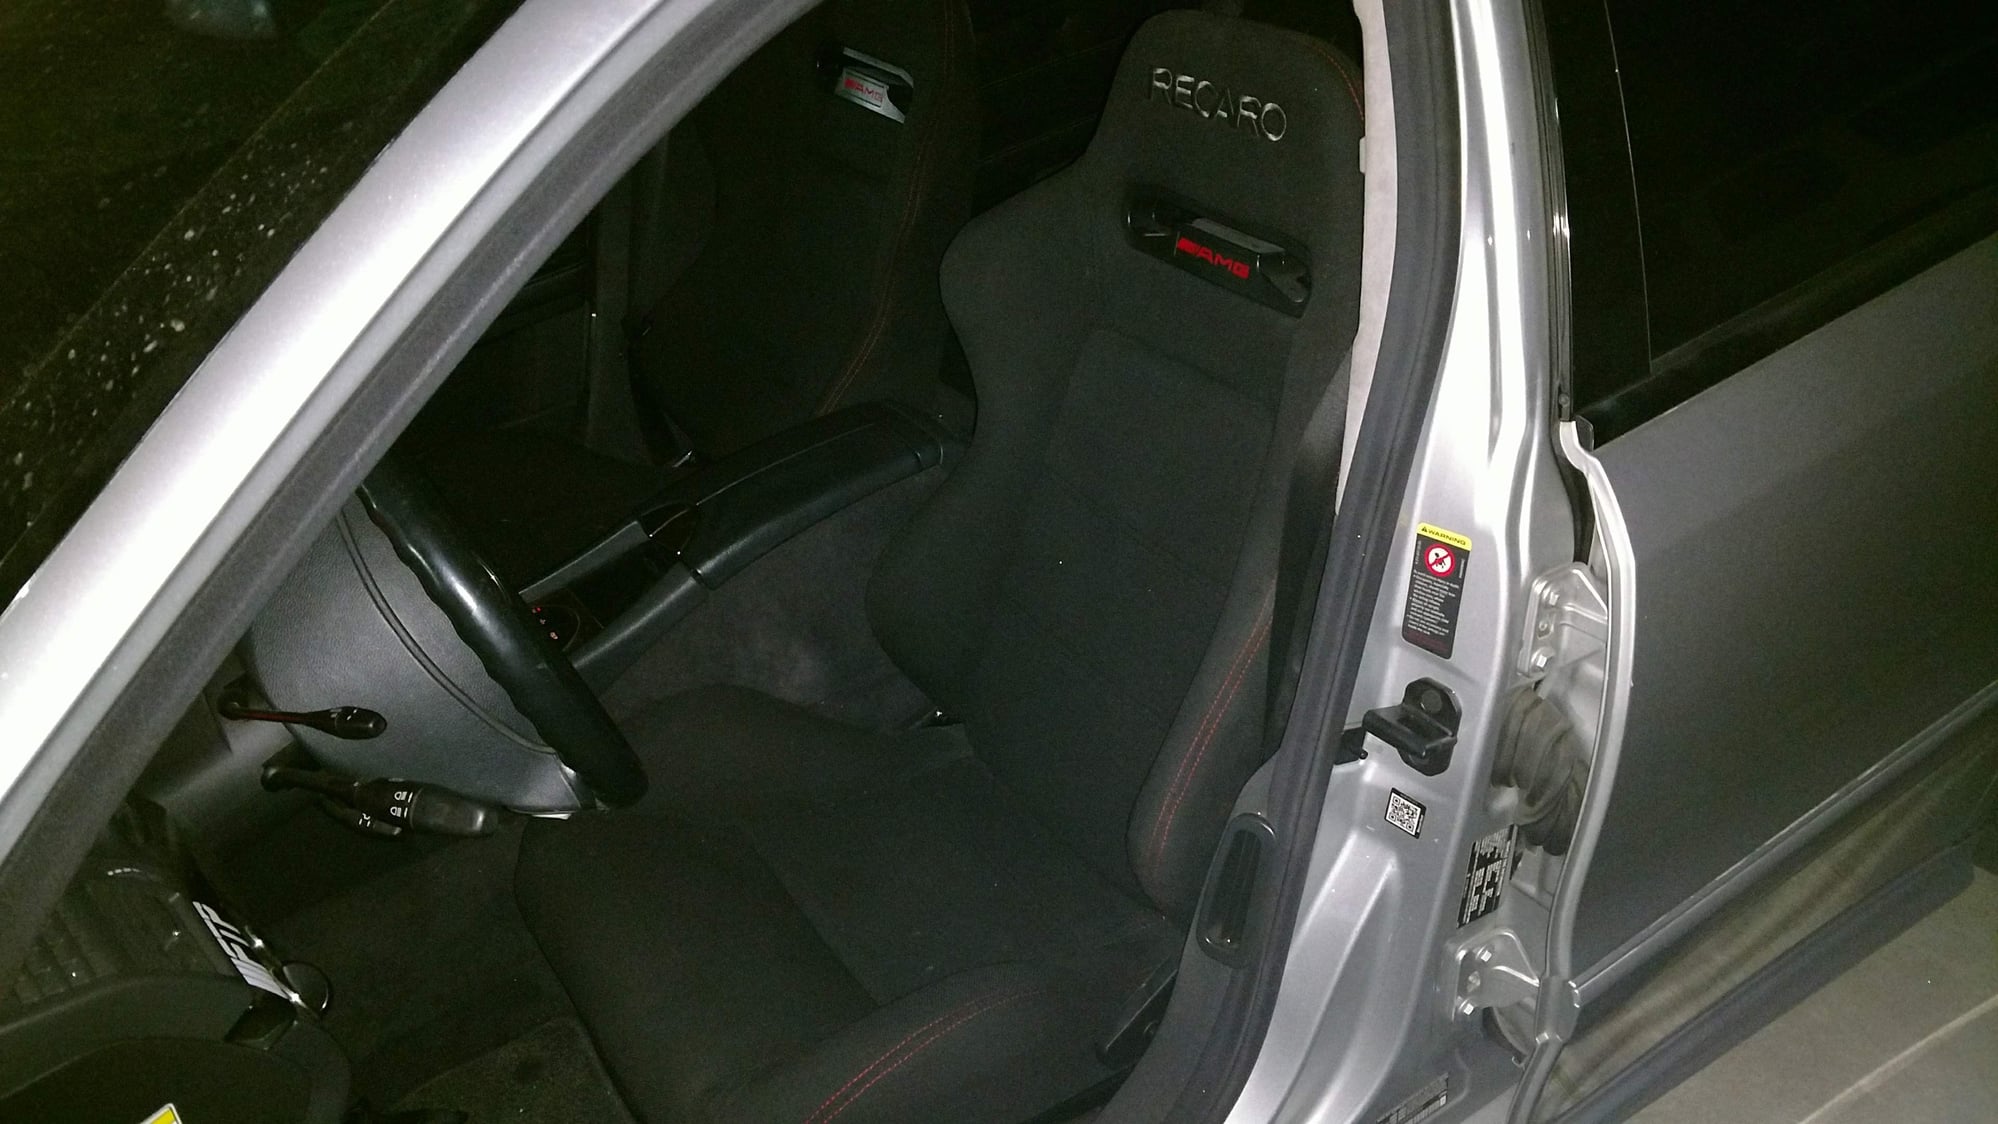 Interior/Upholstery - Wtt: recaro seats for oem - Used - 2003 to 2009 Mercedes-Benz E55 AMG - Turlock, CA 95382, United States